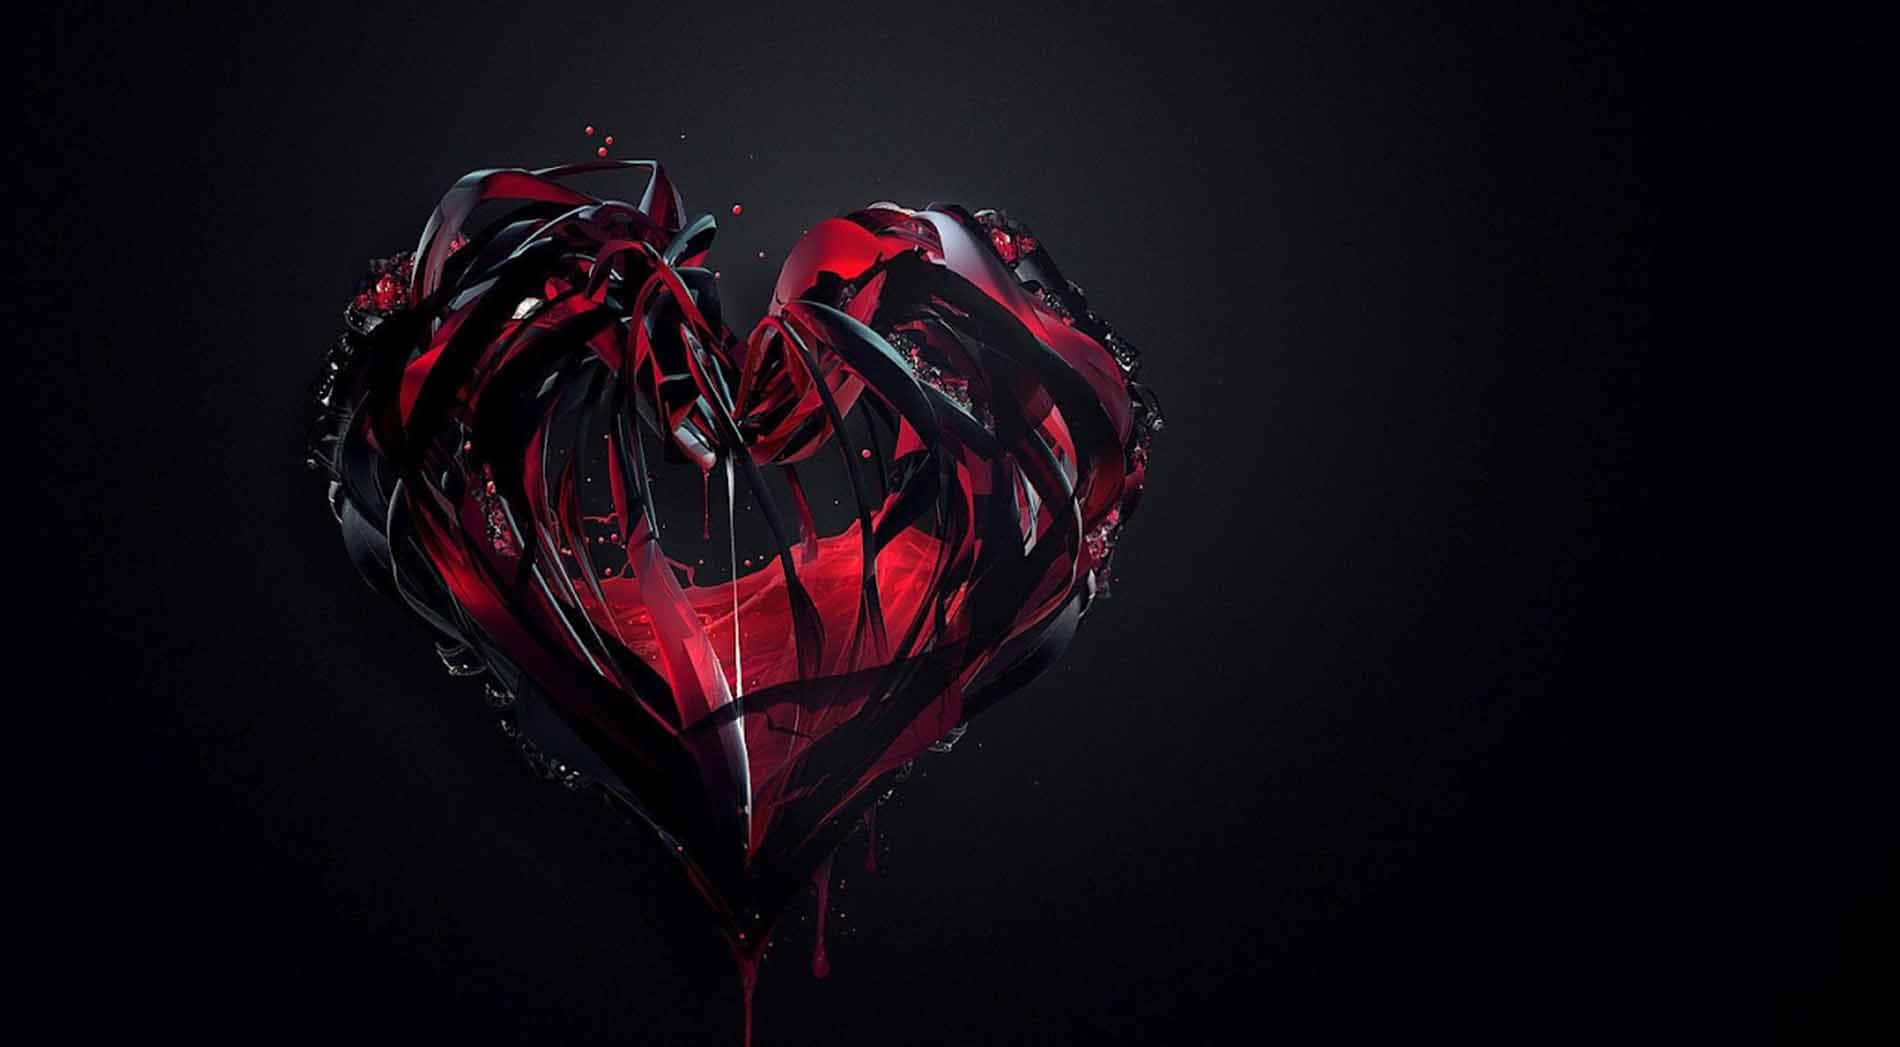 Red Heart Love Background Images, HD Pictures and Wallpaper For Free  Download